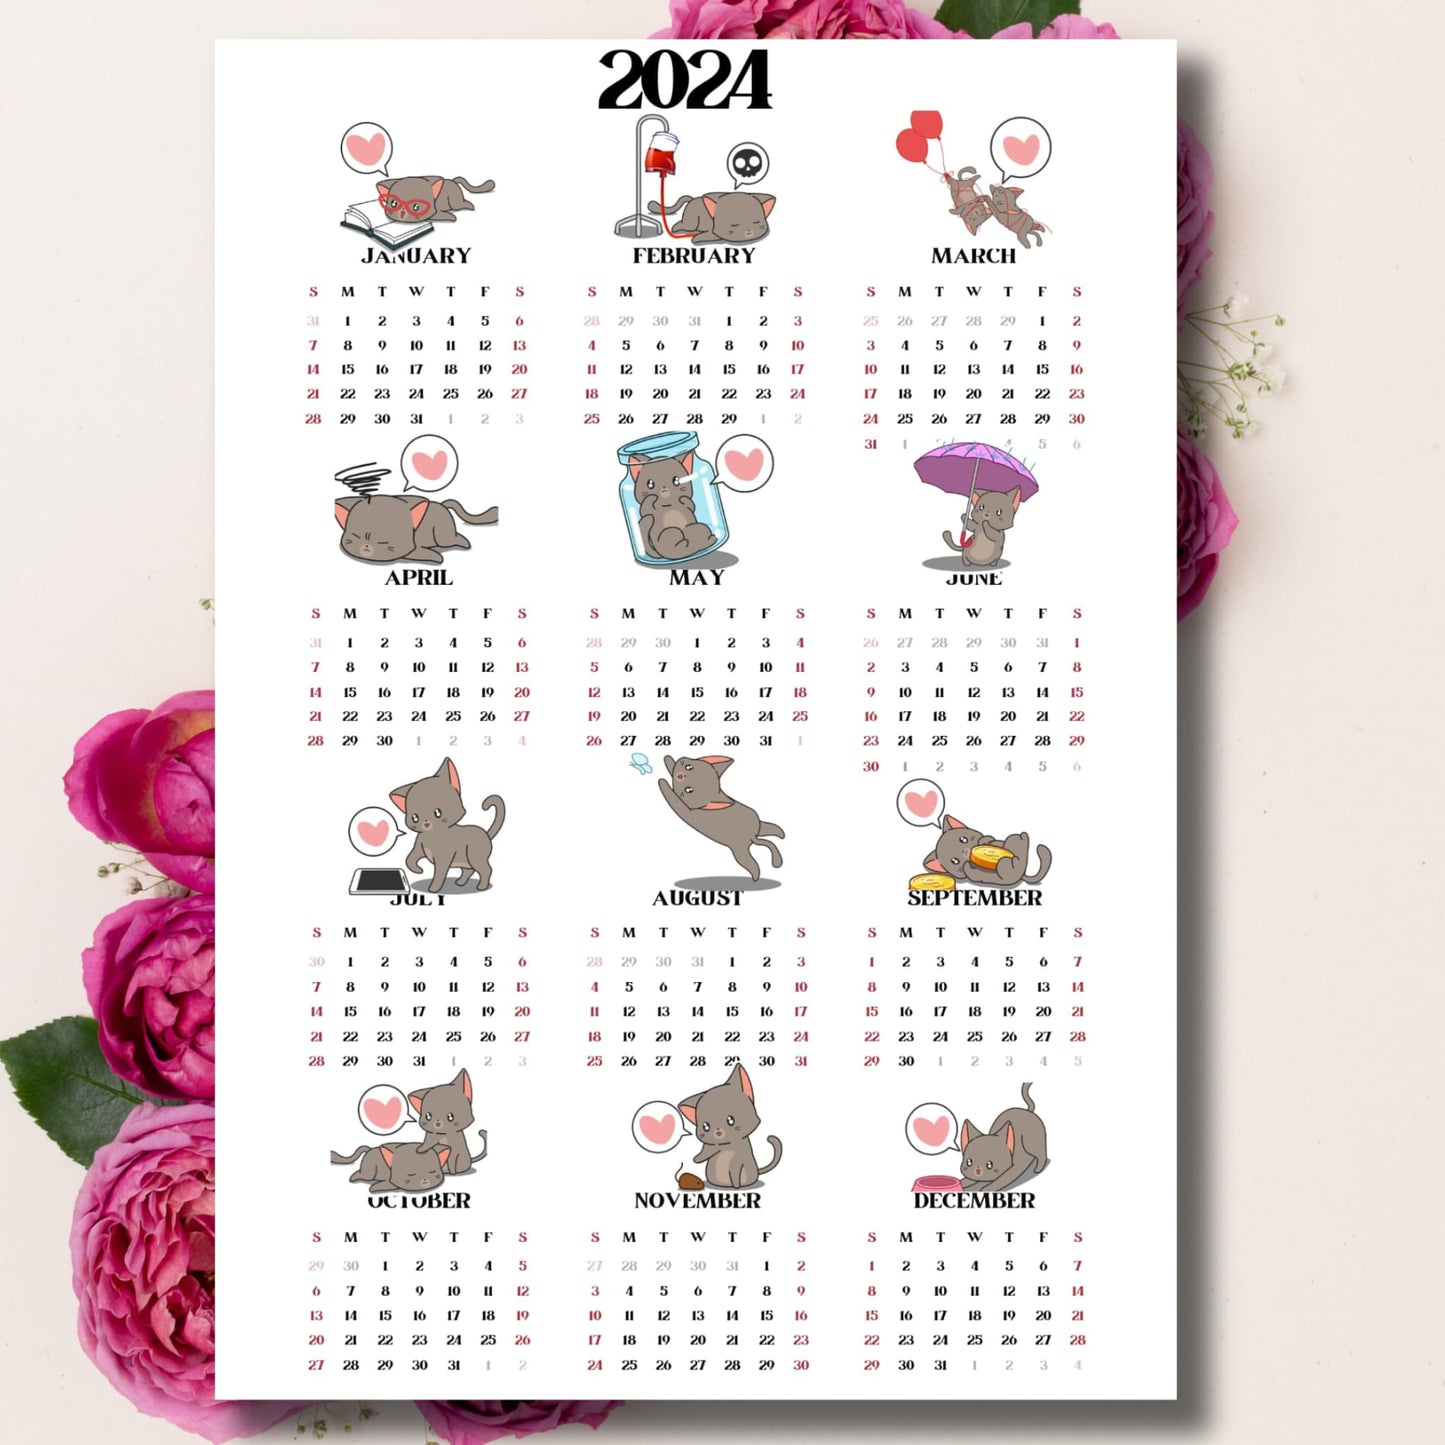 Cute cat illustrated 2024 calendar on beige background with pink peonies.